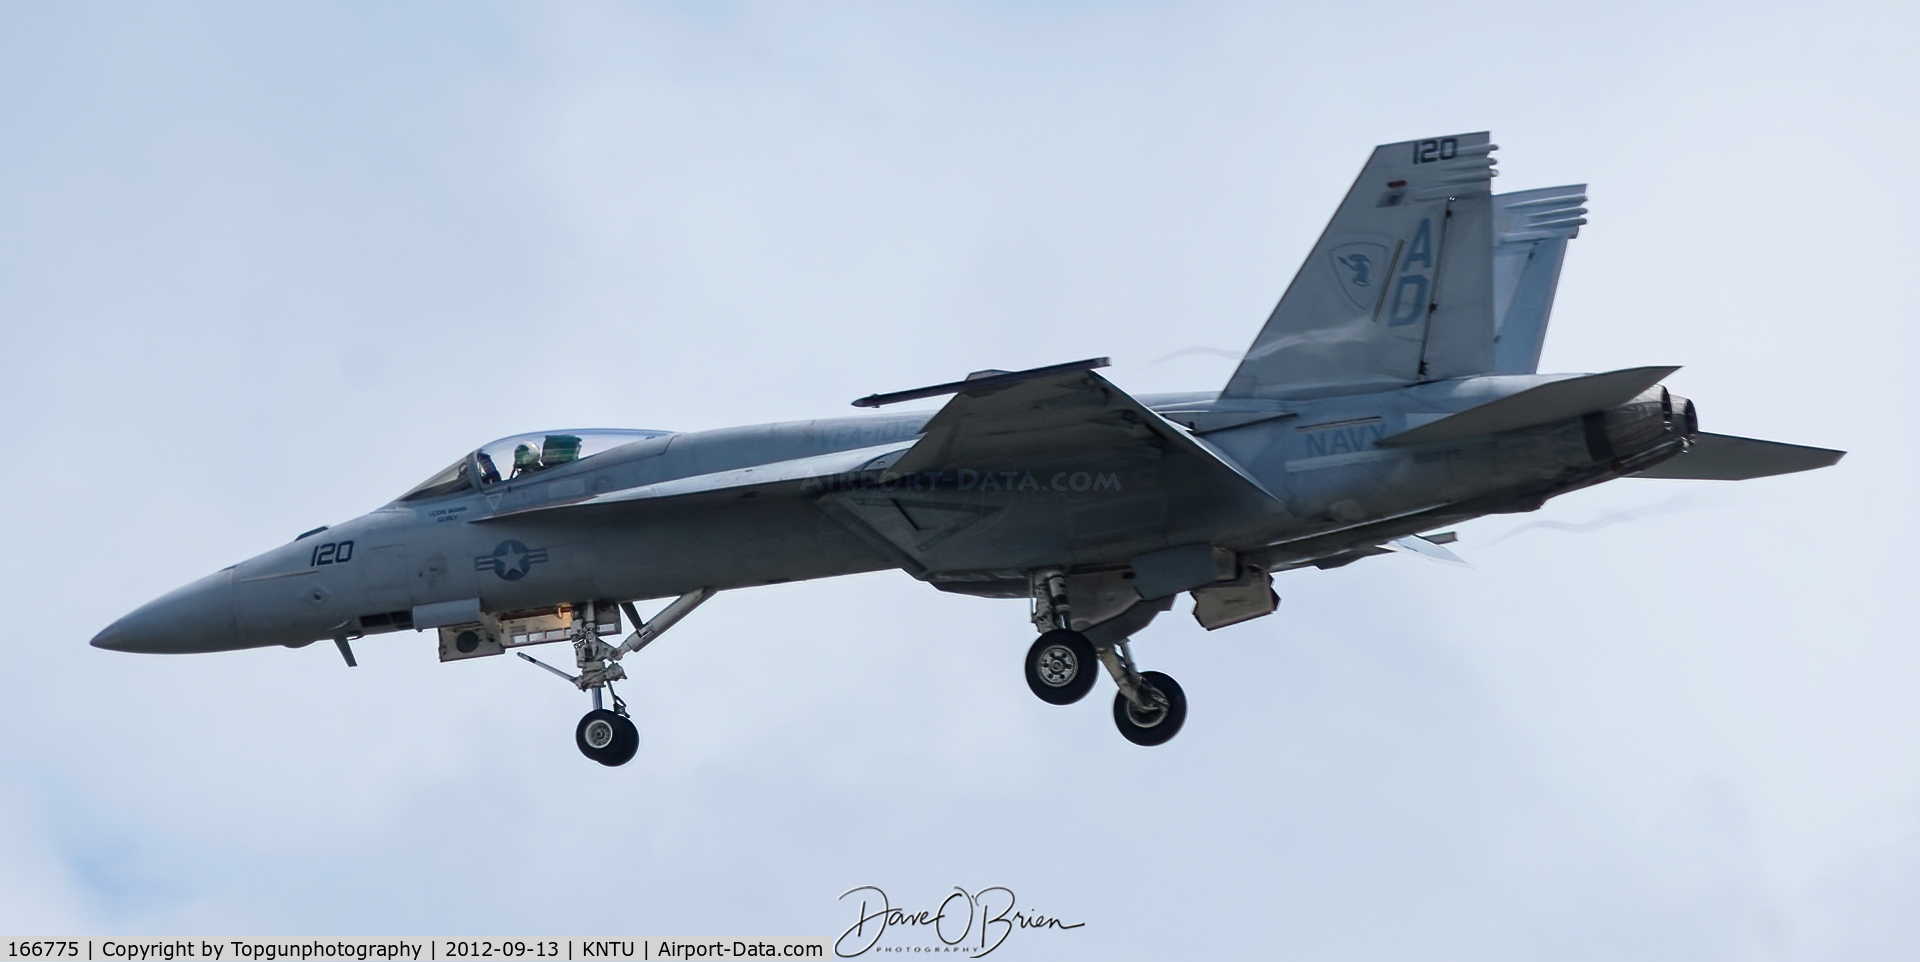 166775, Boeing F/A-18E Super Hornet C/N E121, returning from sortie off the coast